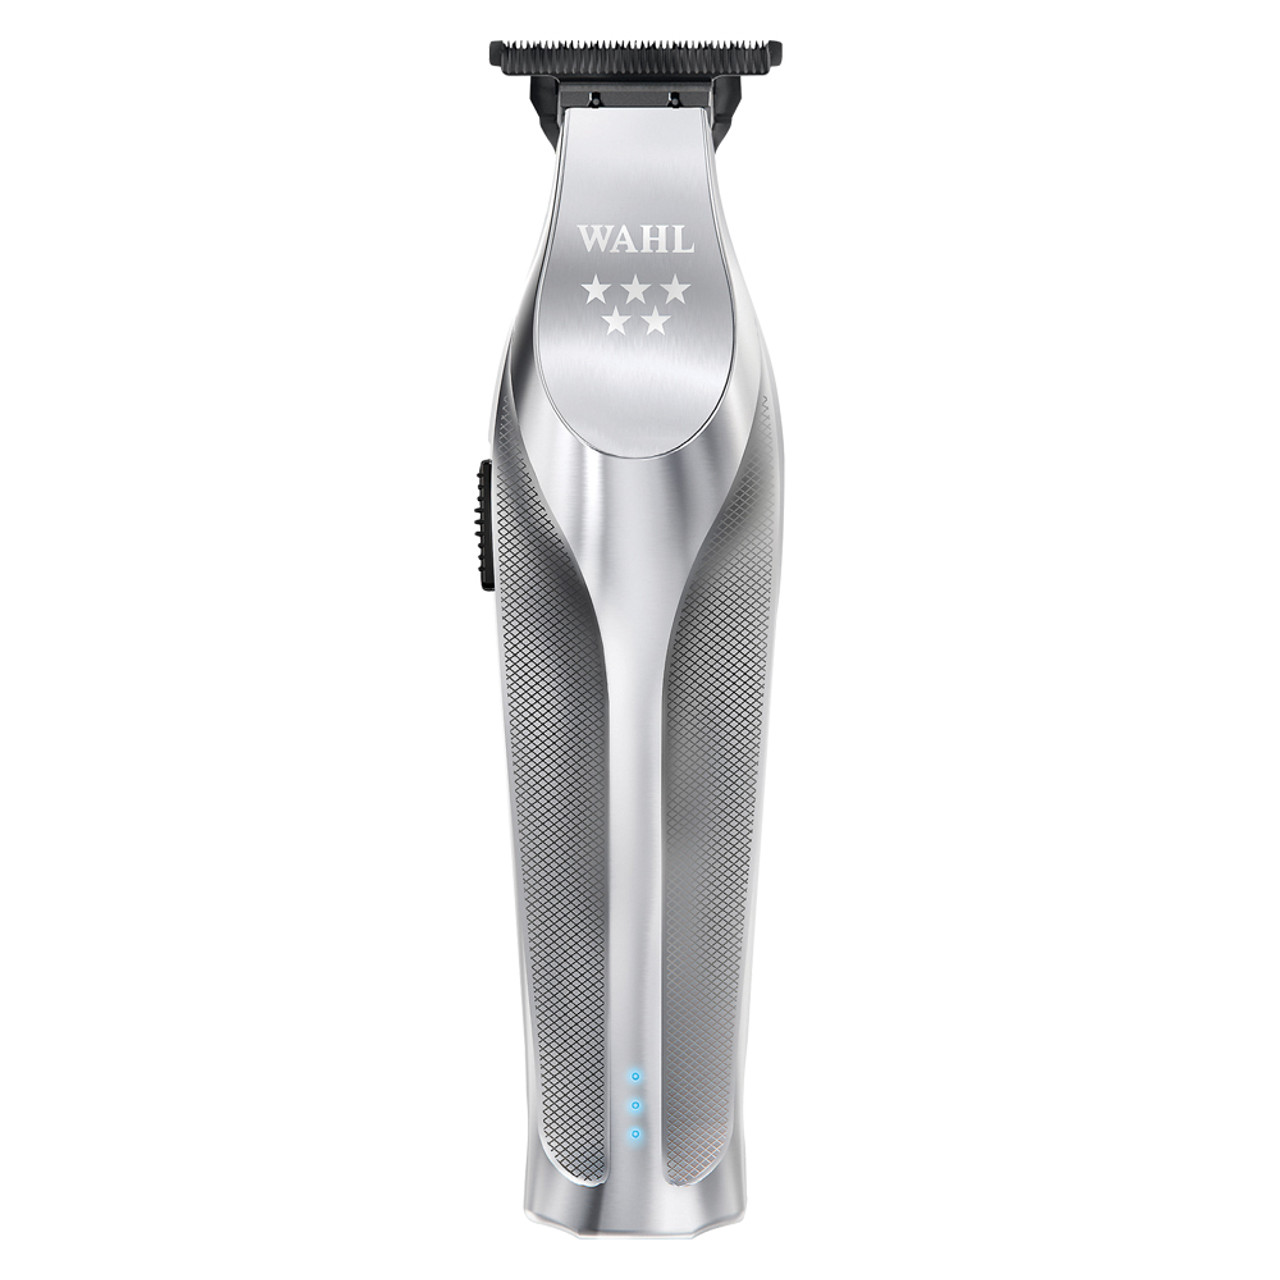 Wahl 5 Star Detailer Trimmer, Clippers & Trimmers